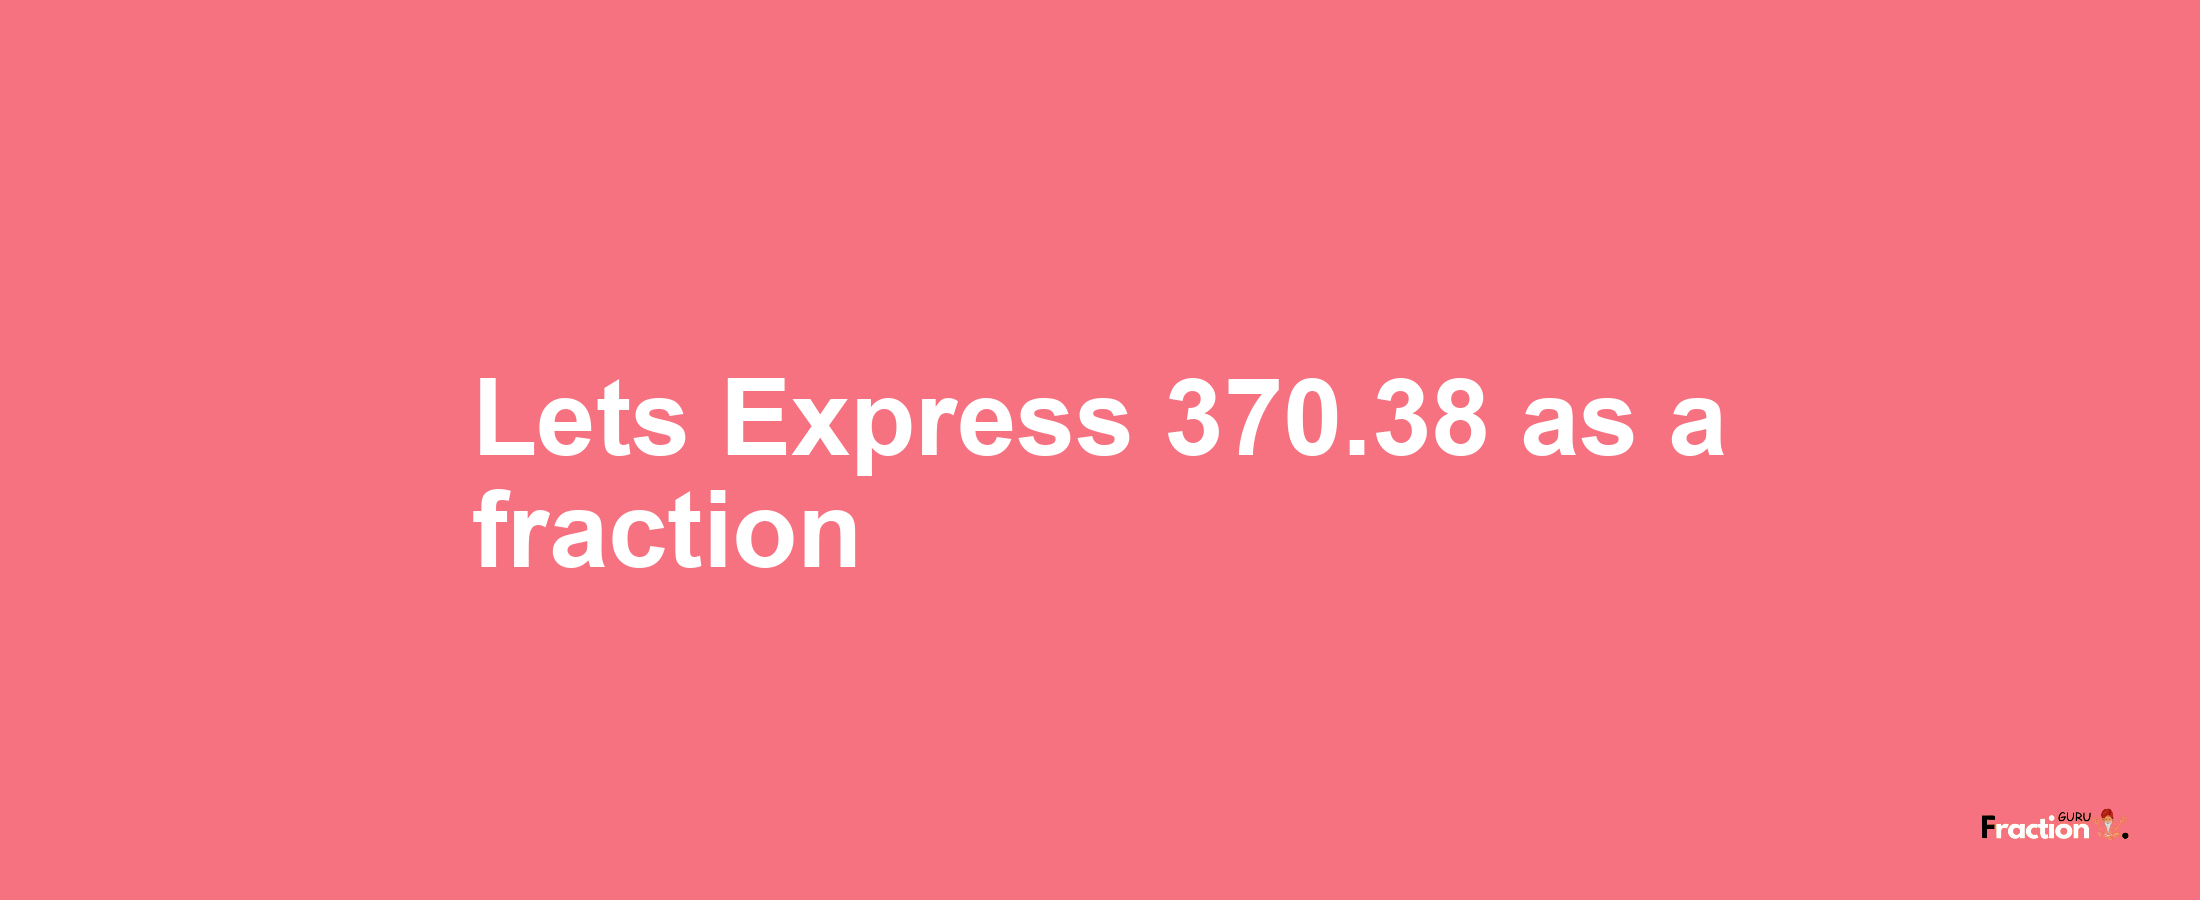 Lets Express 370.38 as afraction